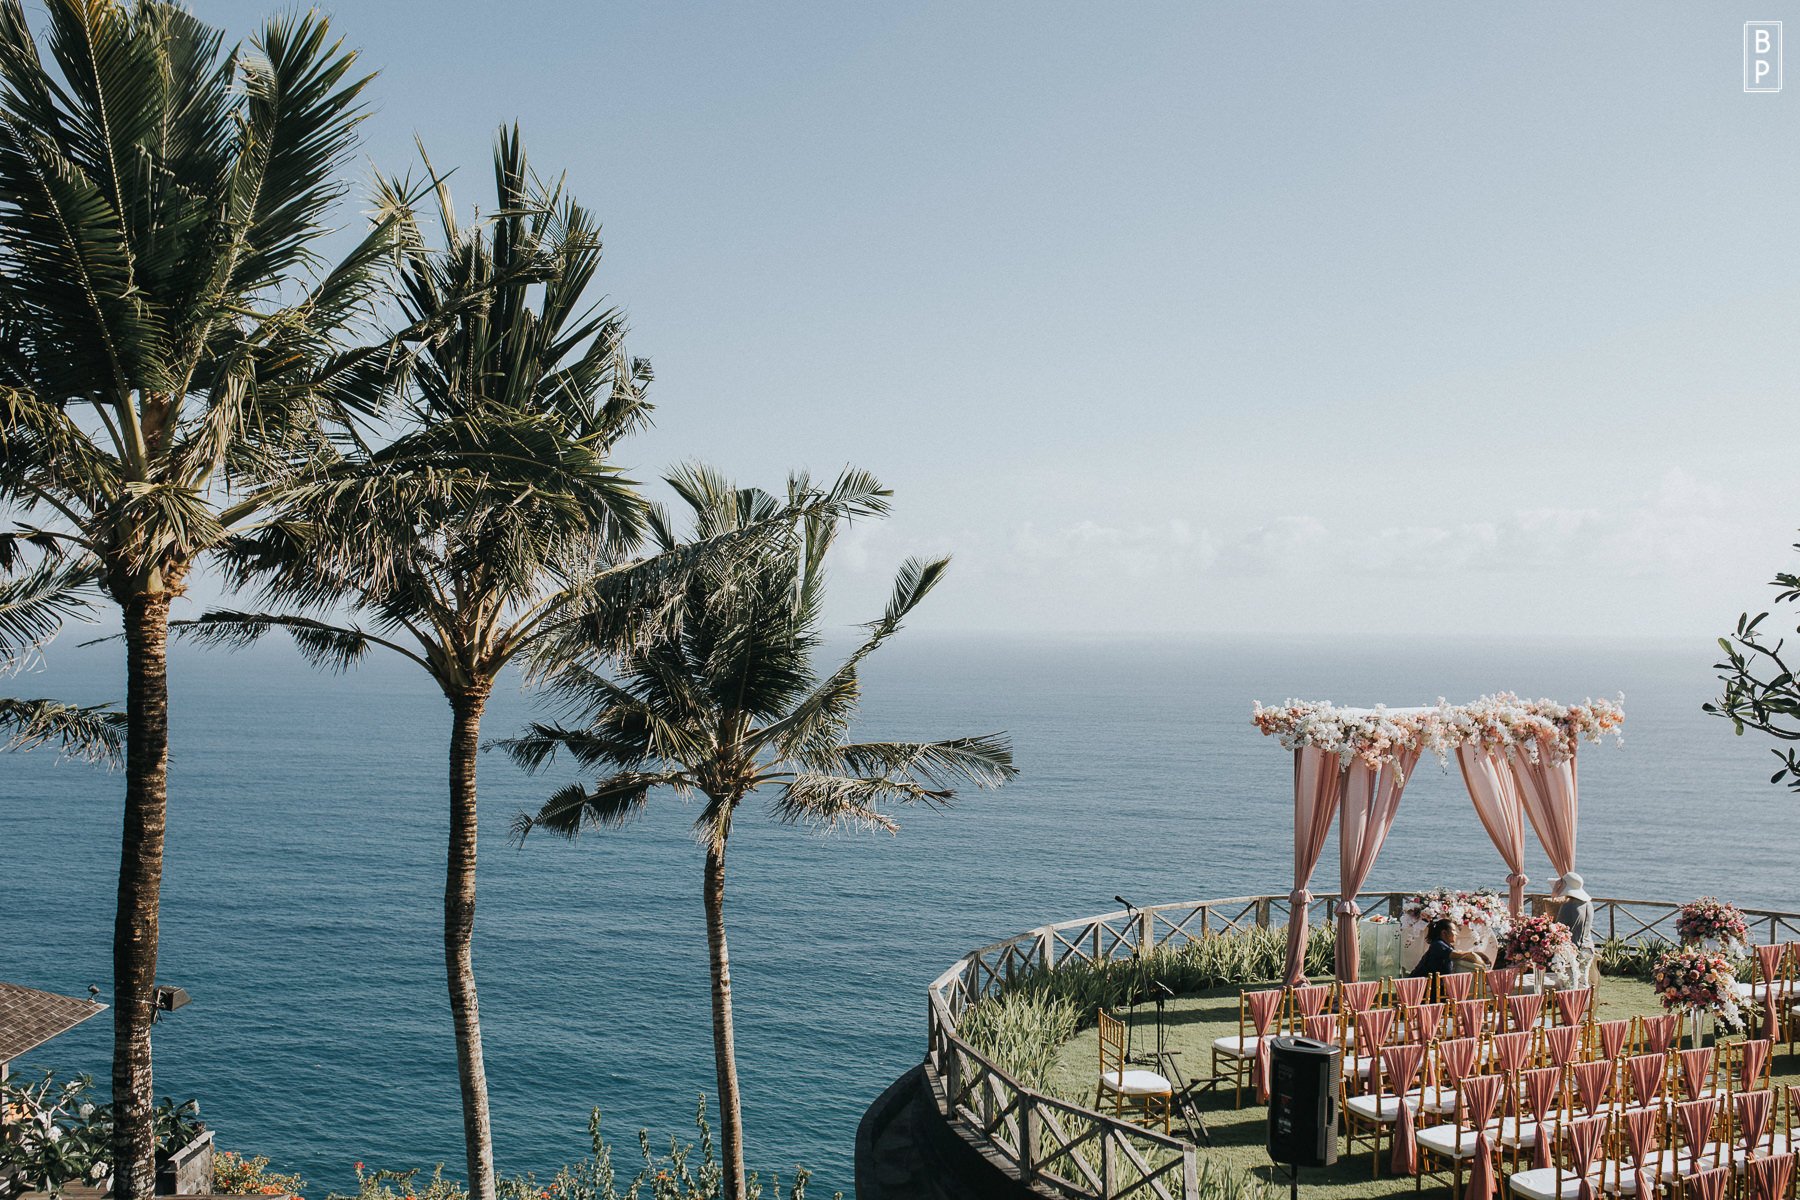 Heavenly Setting, Image from Bali Wedding Solutions